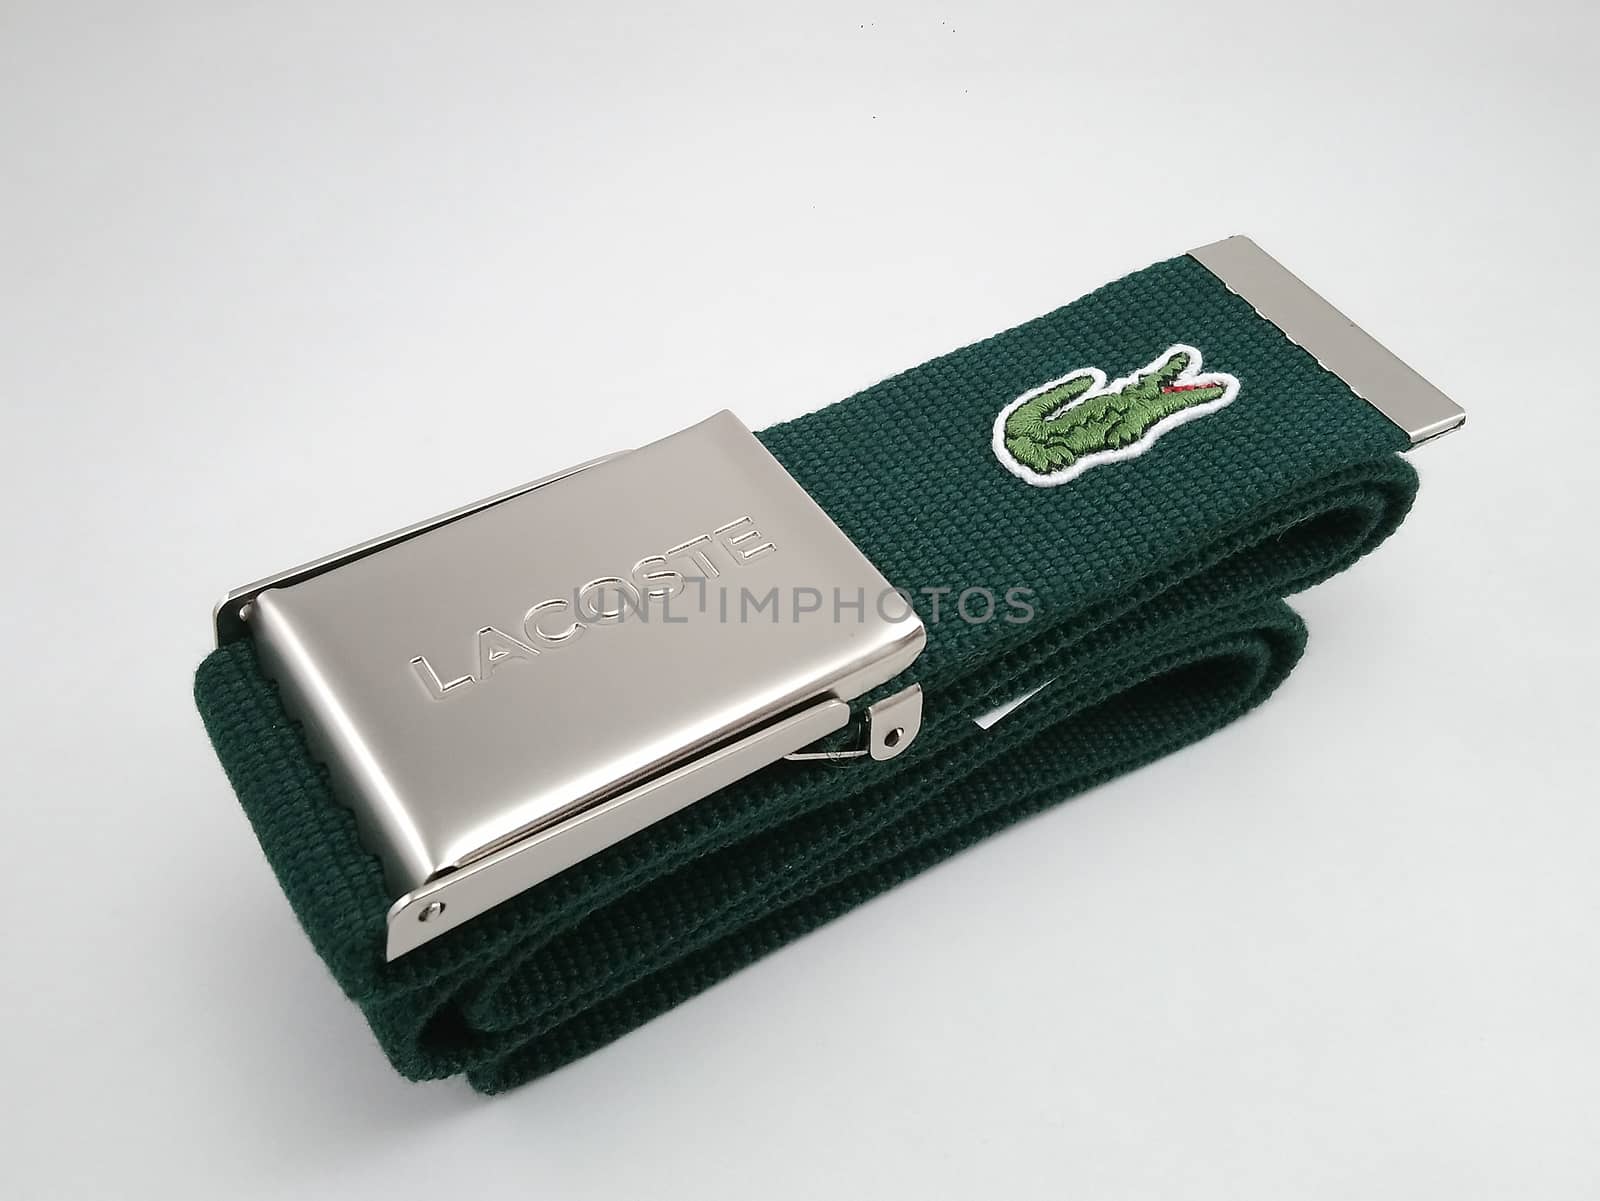 MANILA, PH - SEPT 22 - Lacoste mens belt green color with metal buckle on September 22, 2020 in Manila, Philippines.